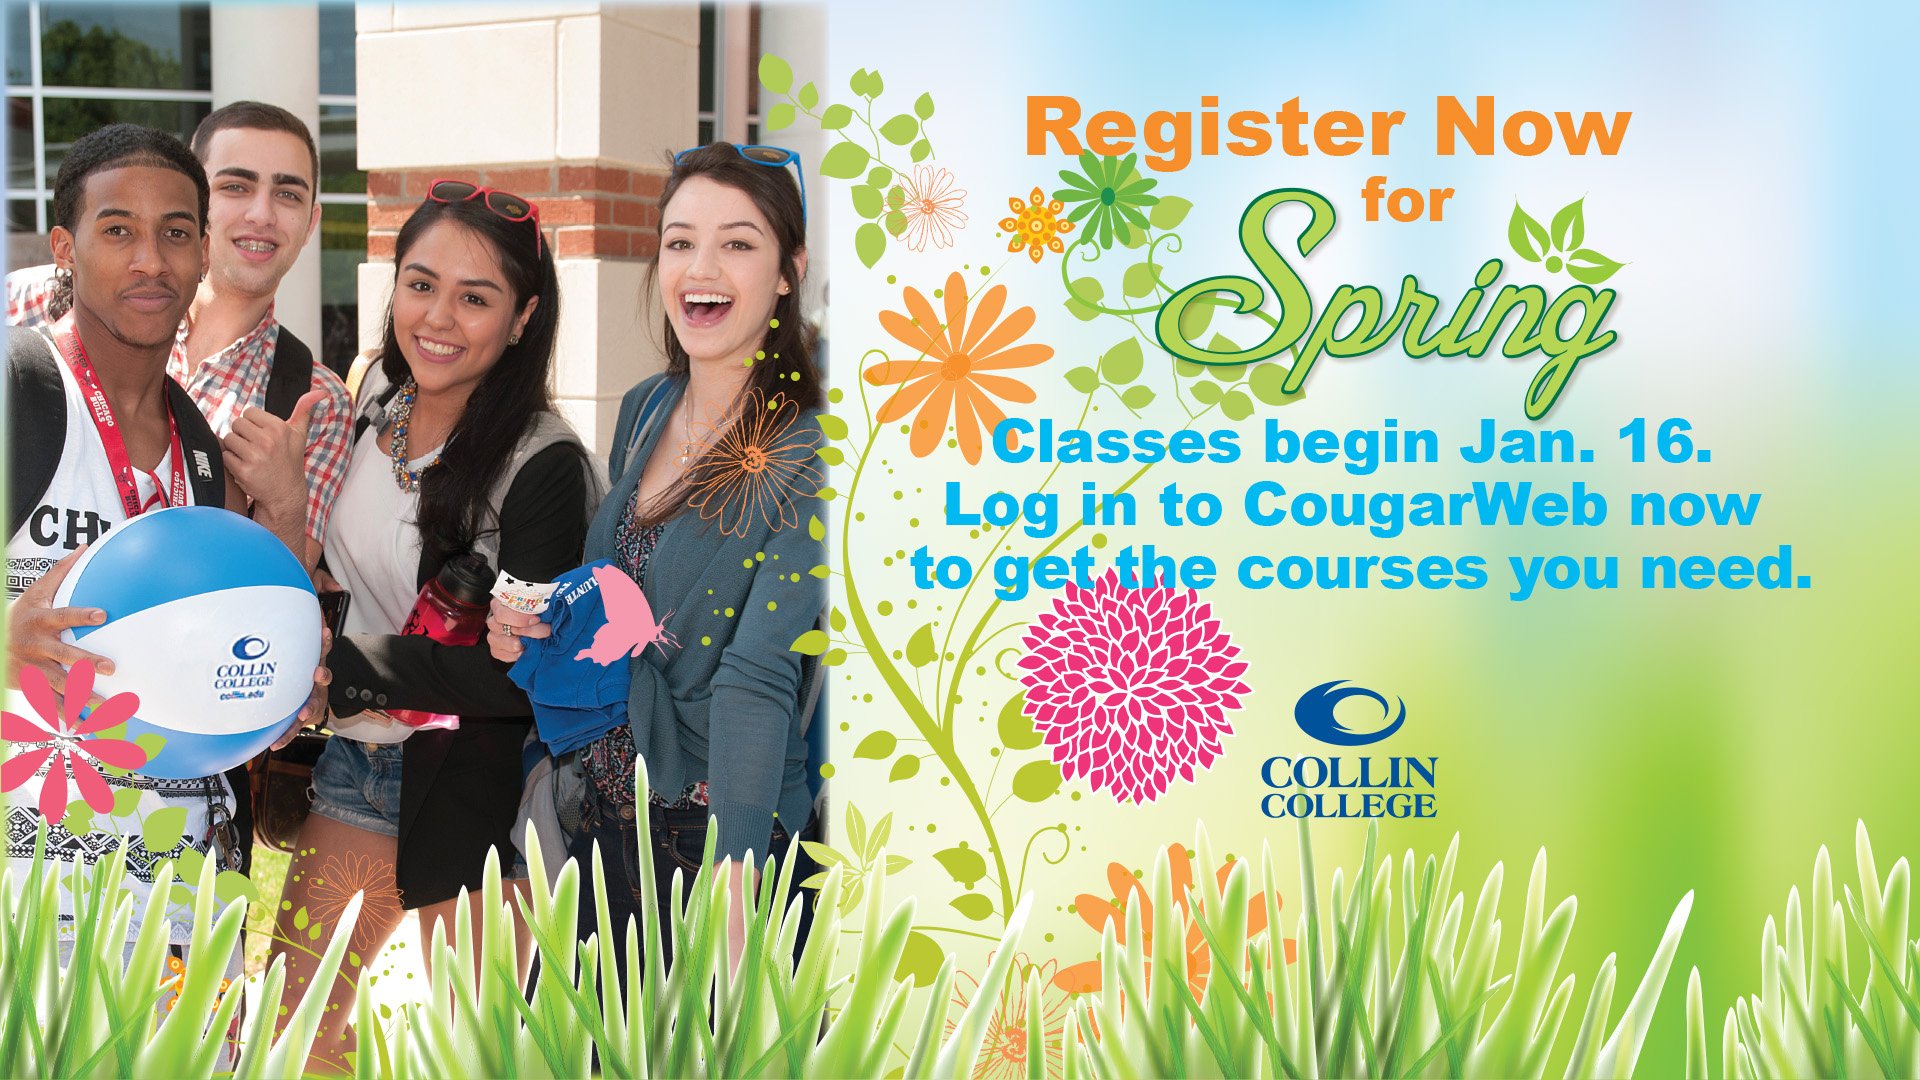 Collin College on Twitter "Have you registered for spring? Classes are